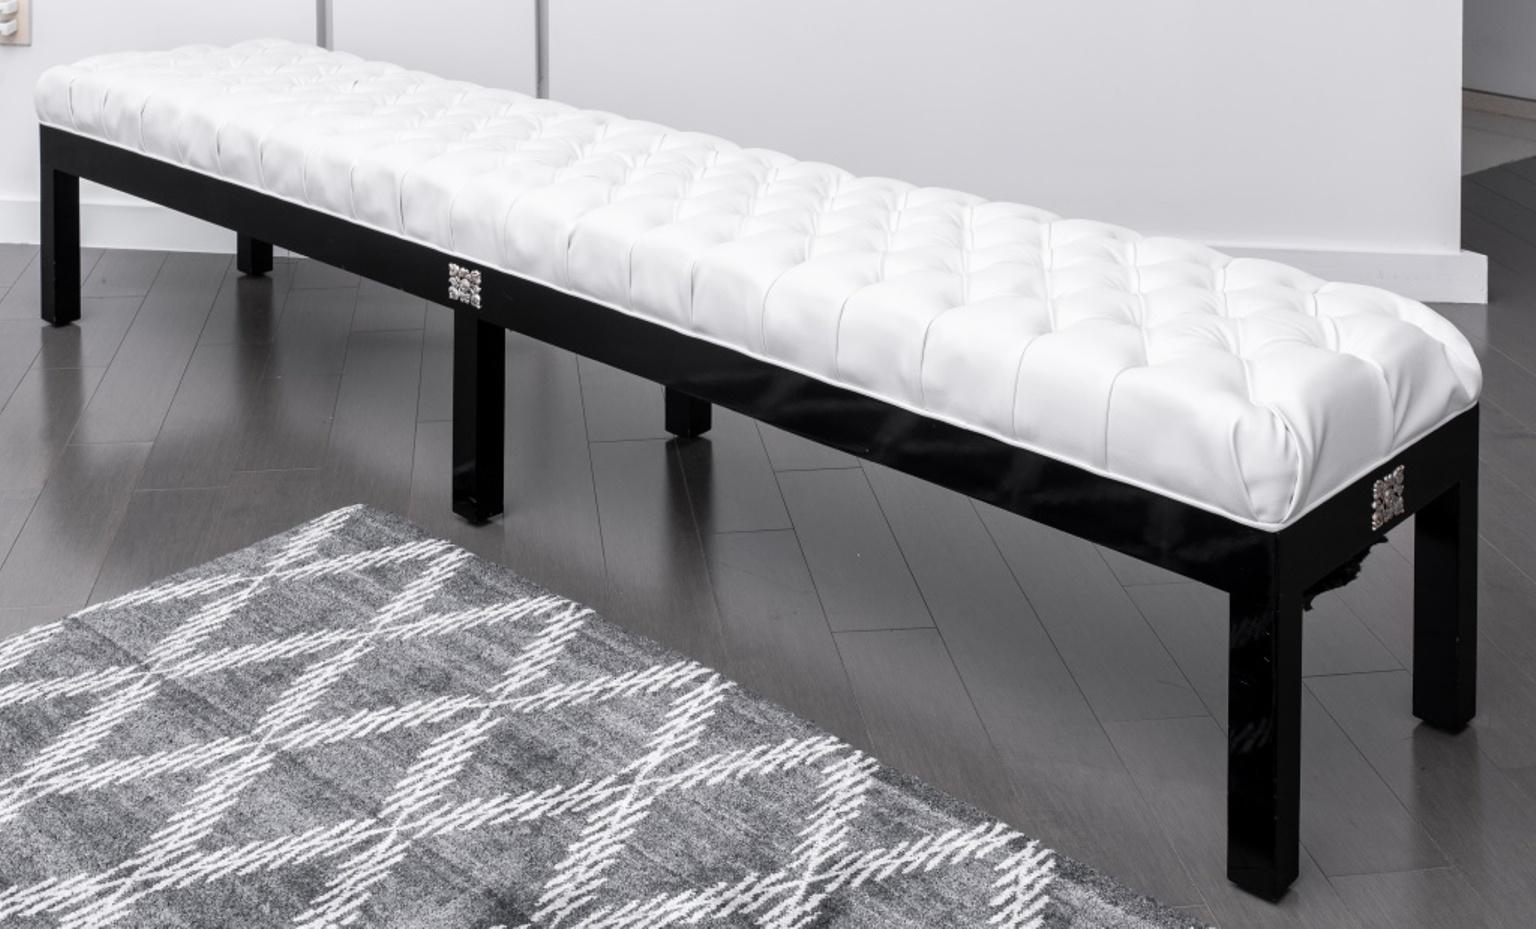 Hollywood glam rectangular white tufted faux leather black lacquered and silvered metal mounted bench.

Dealer: S138XX.